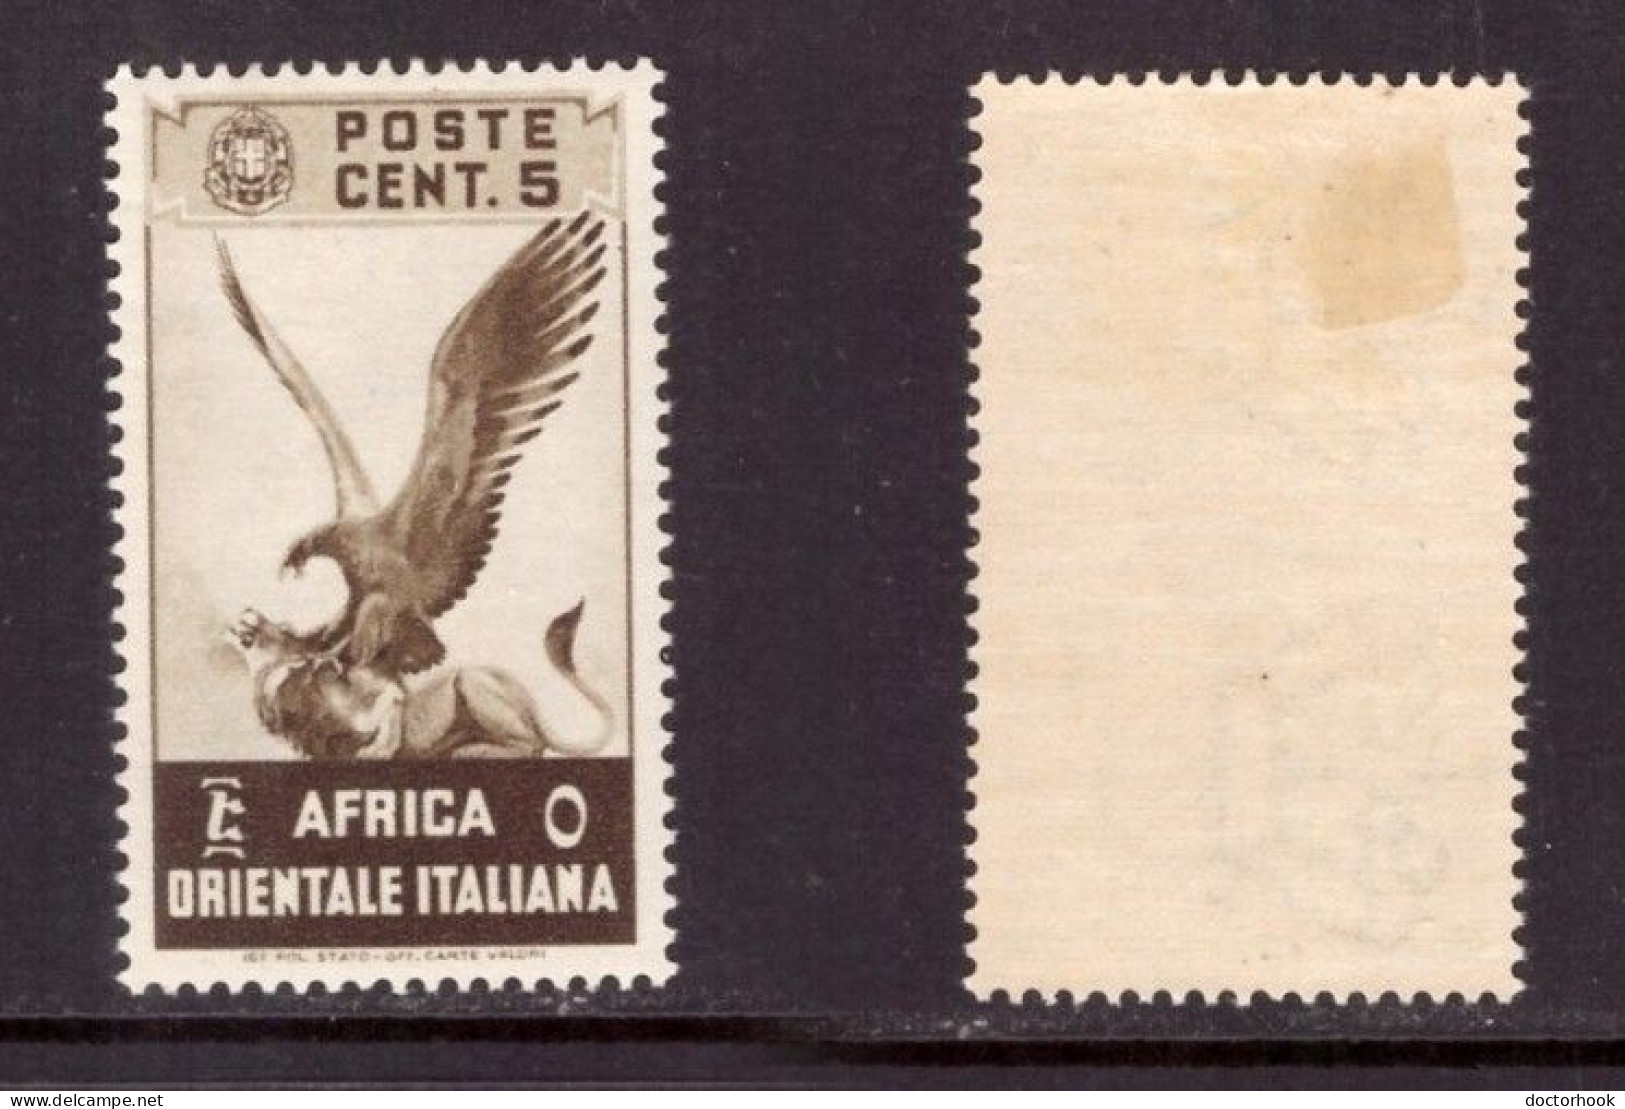 ITALIAN EAST AFRICA   Scott # 2* MINT HINGED (CONDITION AS PER SCAN) (Stamp Scan # 956-3) - Africa Orientale